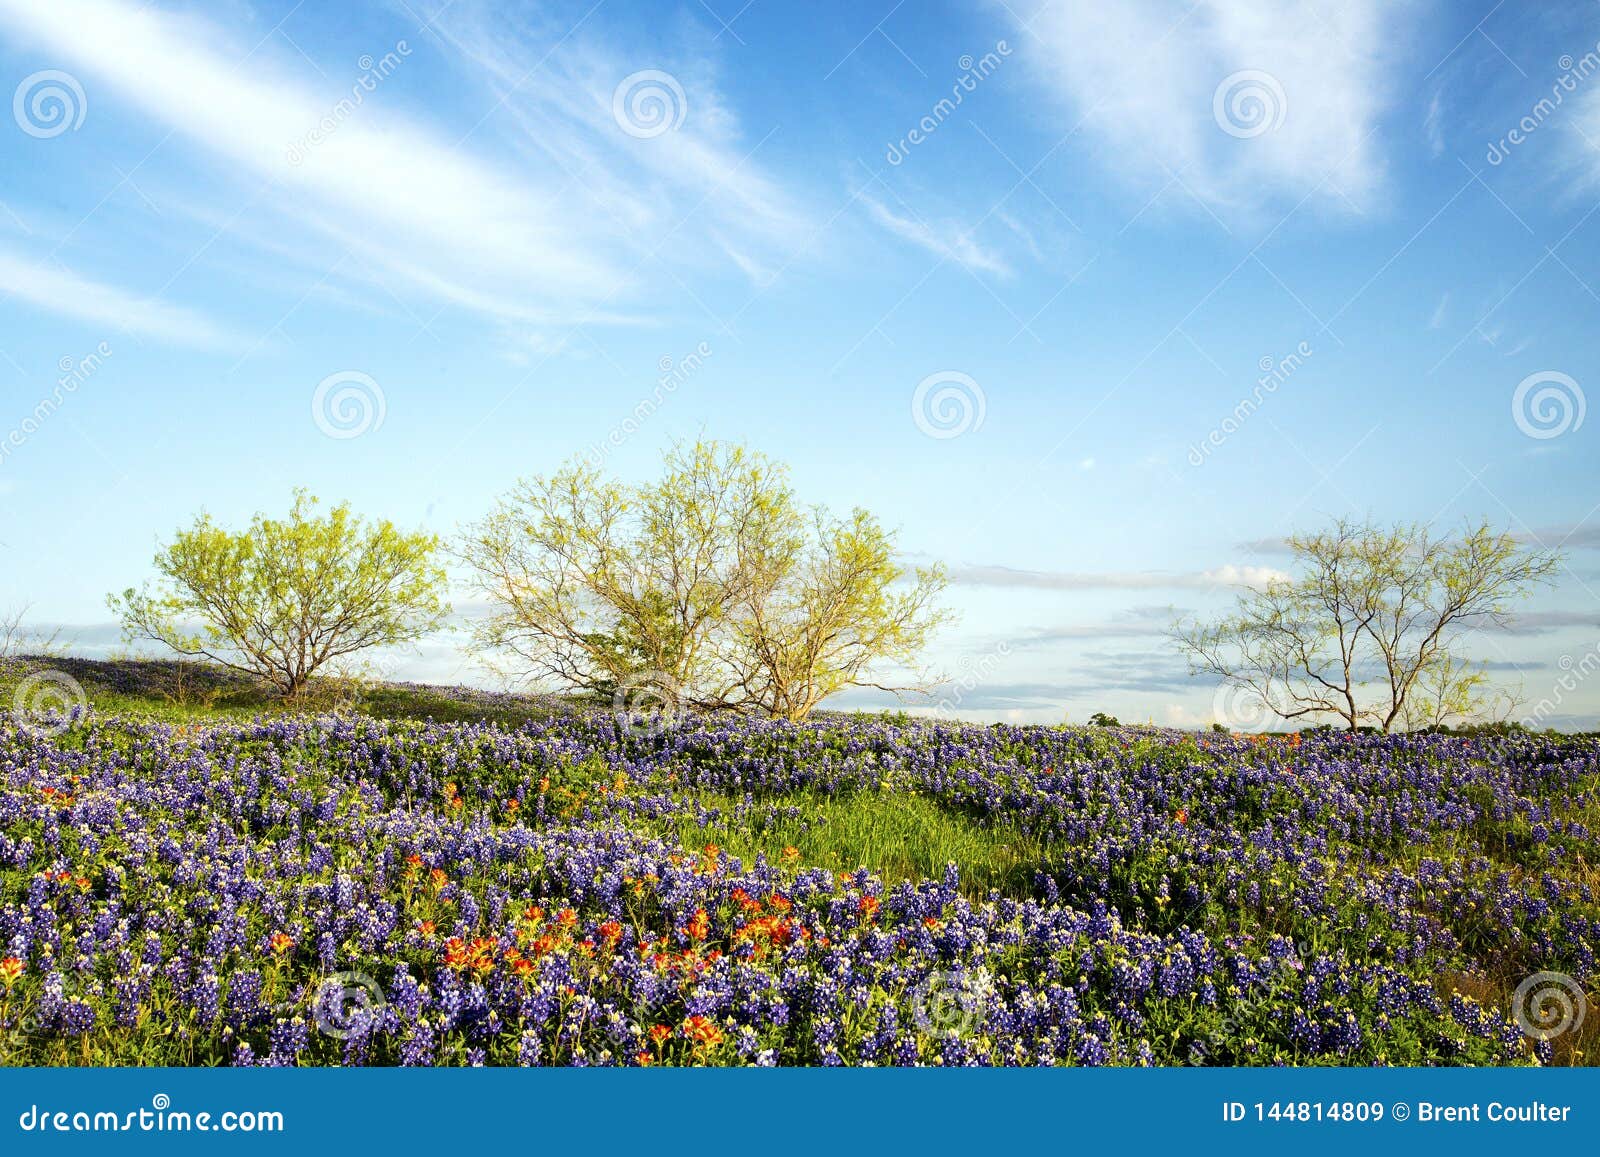 Bluebonnets in Texas Hill Country Stock Image - Image of green ...